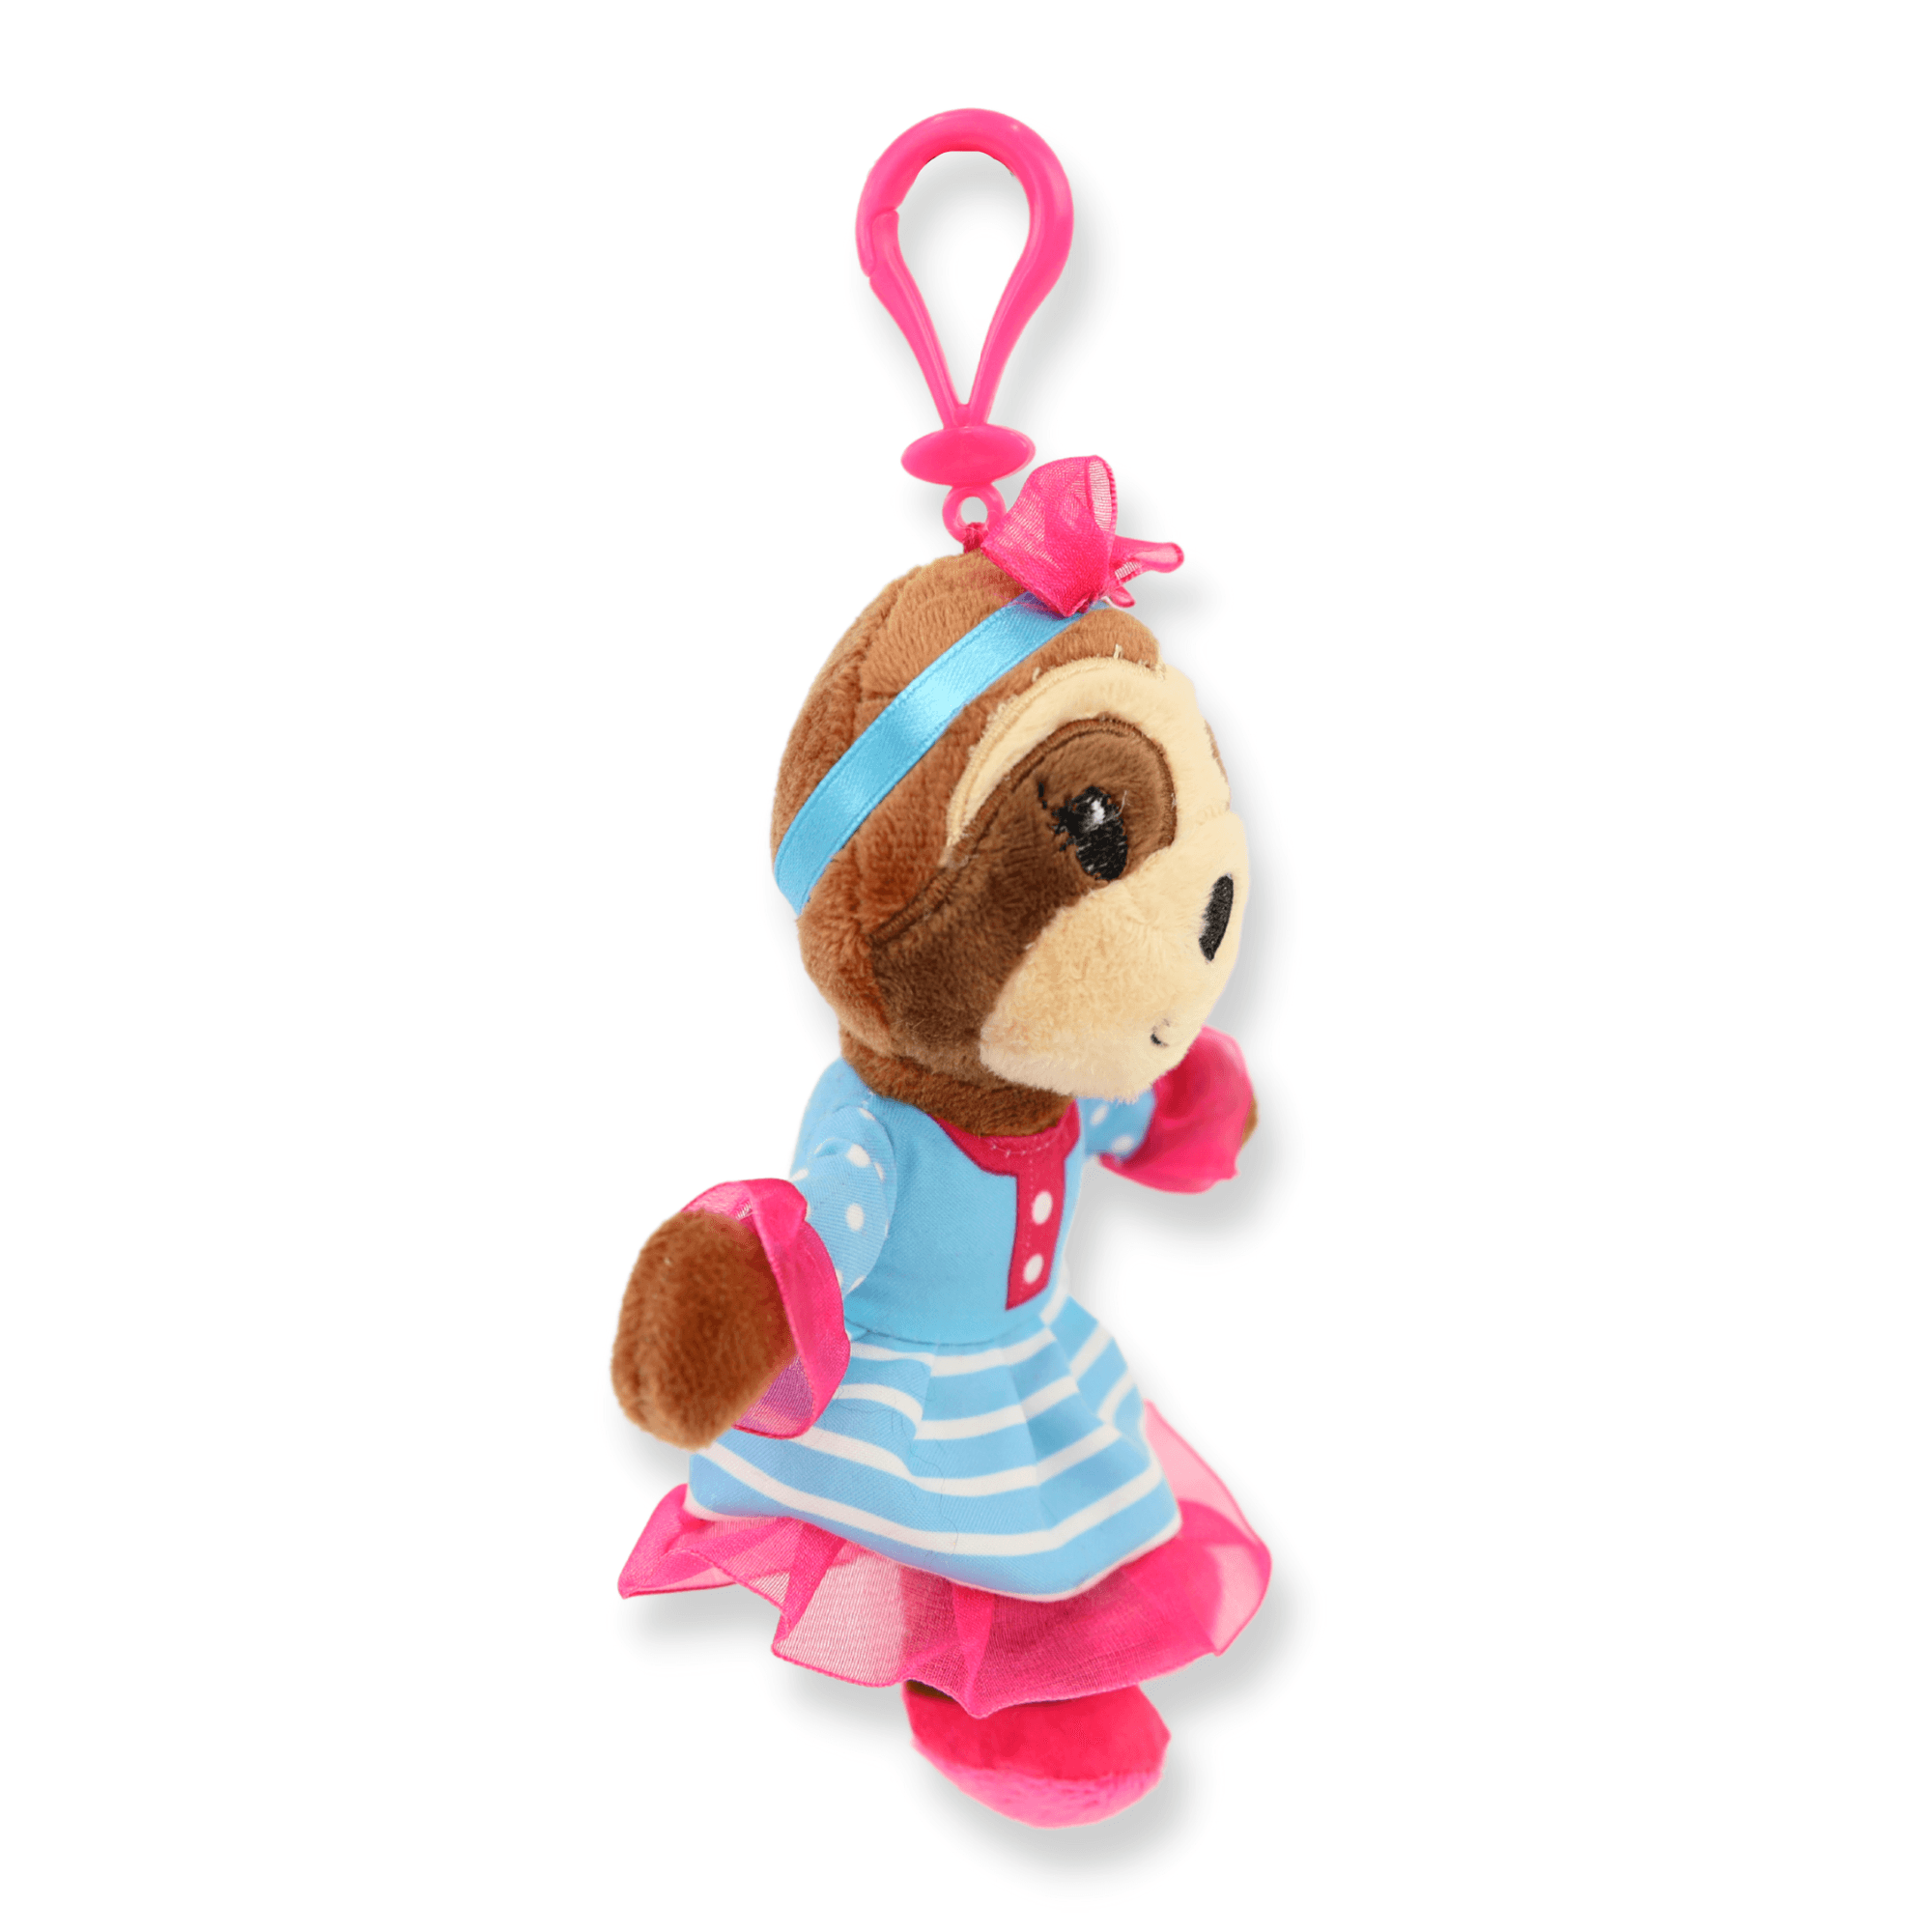 Sharewood Forest Friends Backpack Clip Sofie the Sloth - OrangeOnions Wholesale